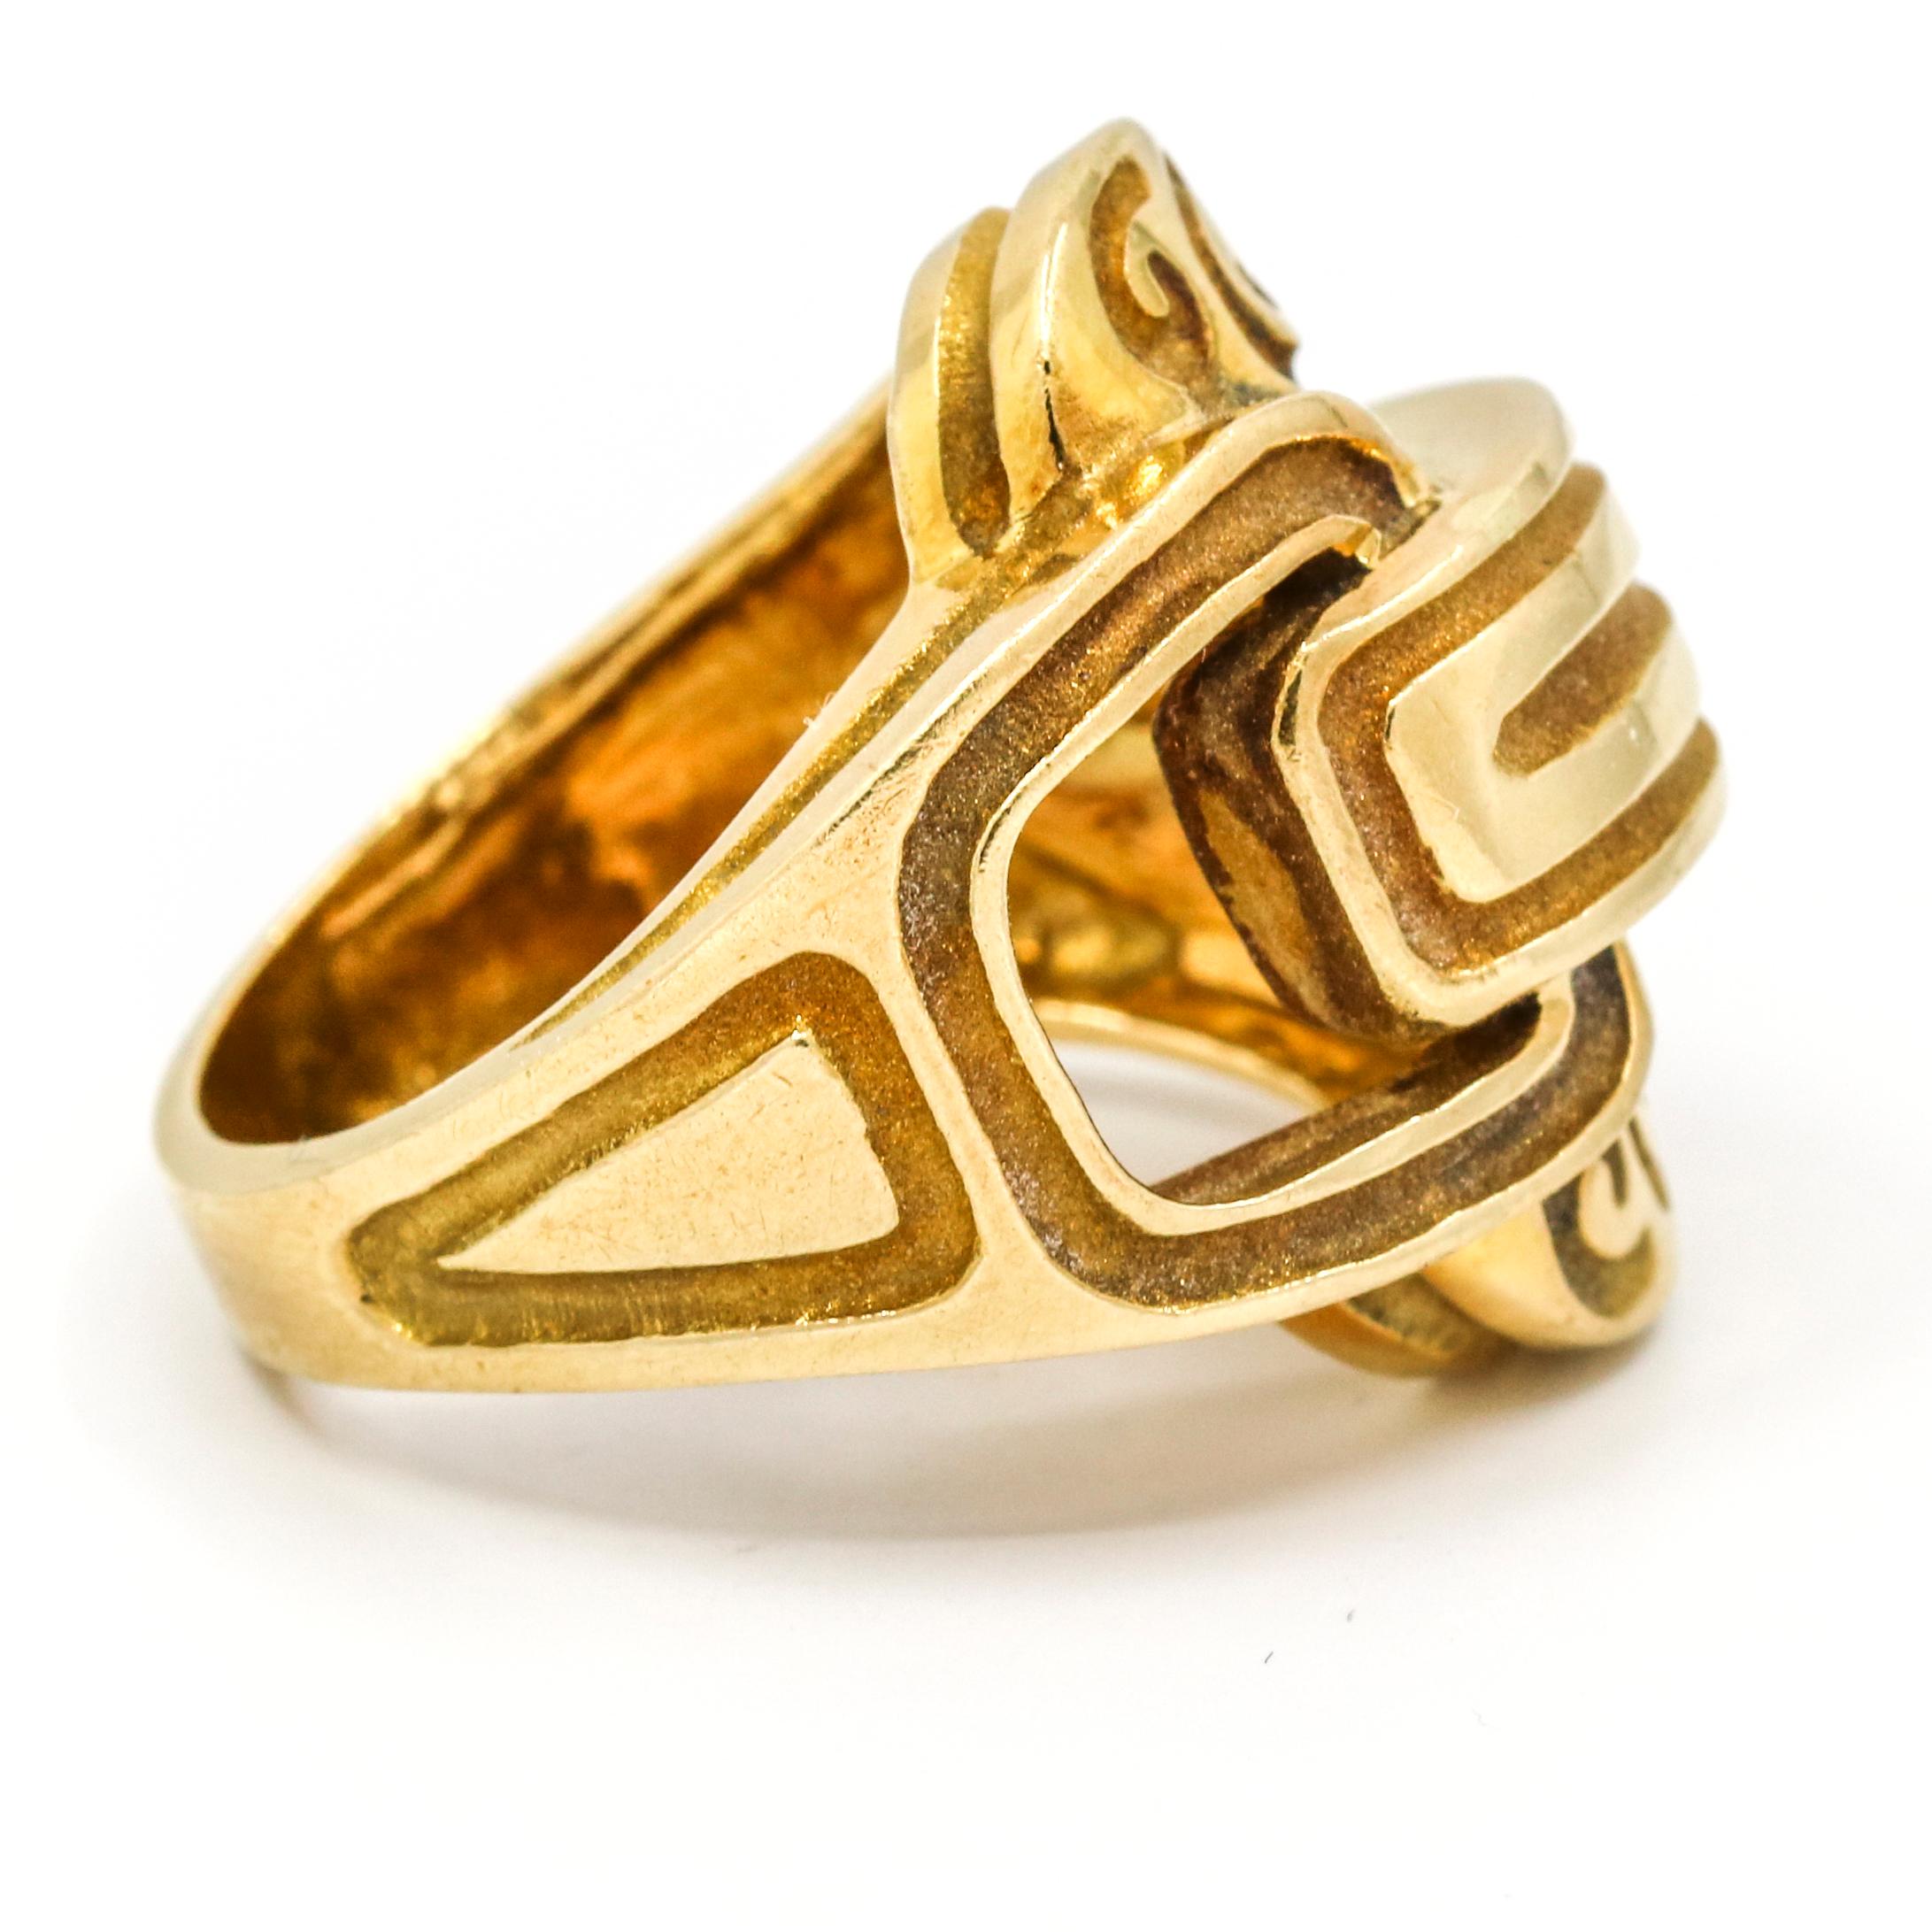 Robert Wander Winc Creations 18 Karat Yellow Gold Buckle Fashion Ring In Good Condition For Sale In Fort Lauderdale, FL